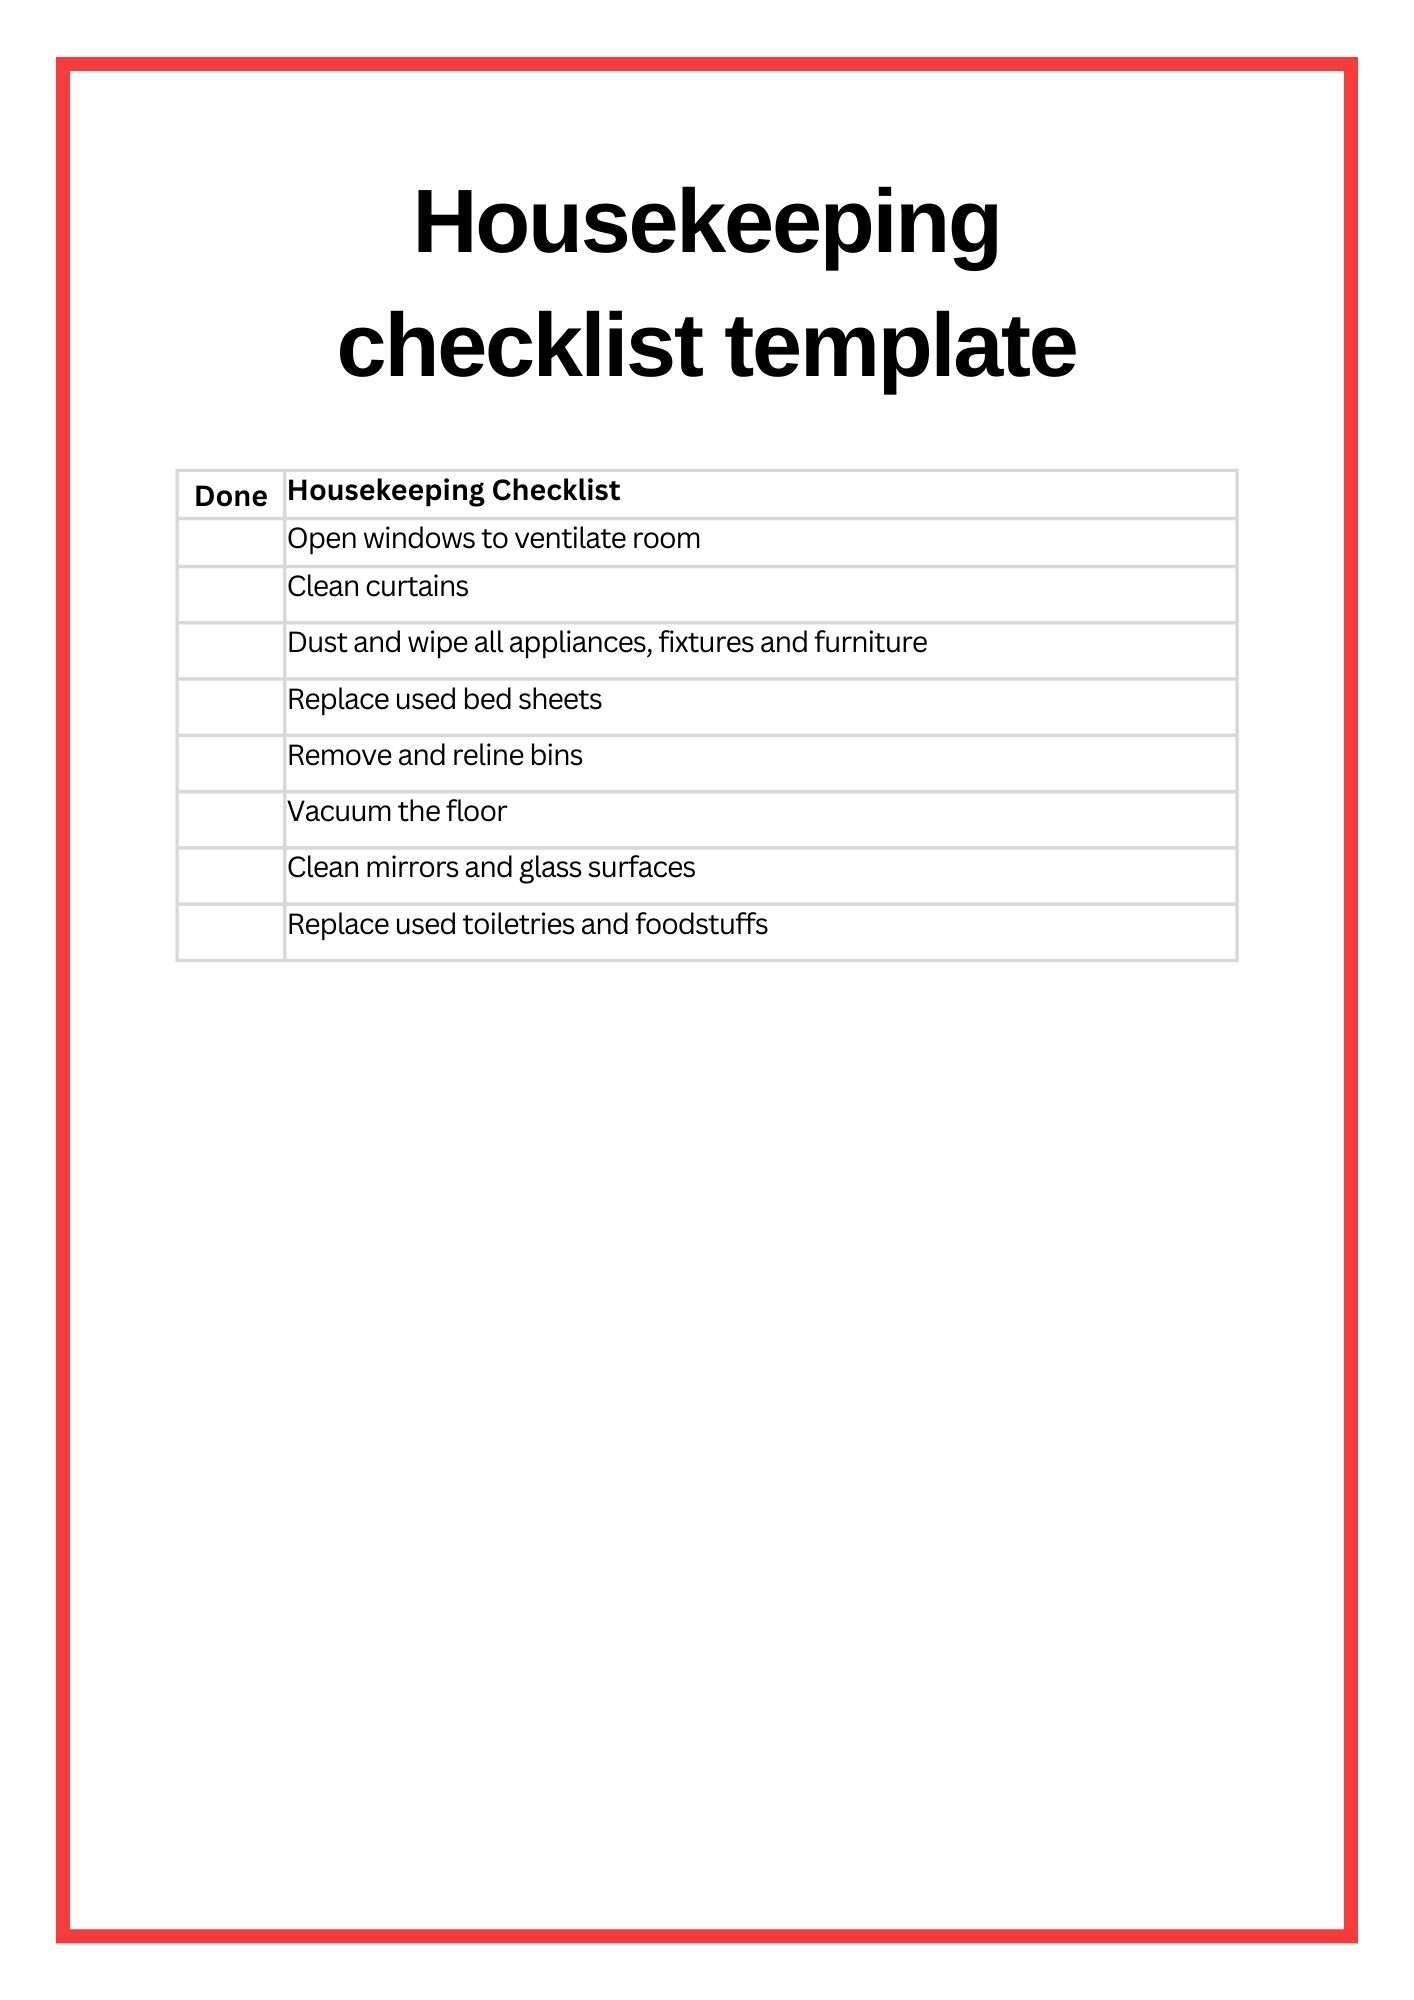 Housekeeping Checklist: Cleaning Checklist for Hotels & Resorts